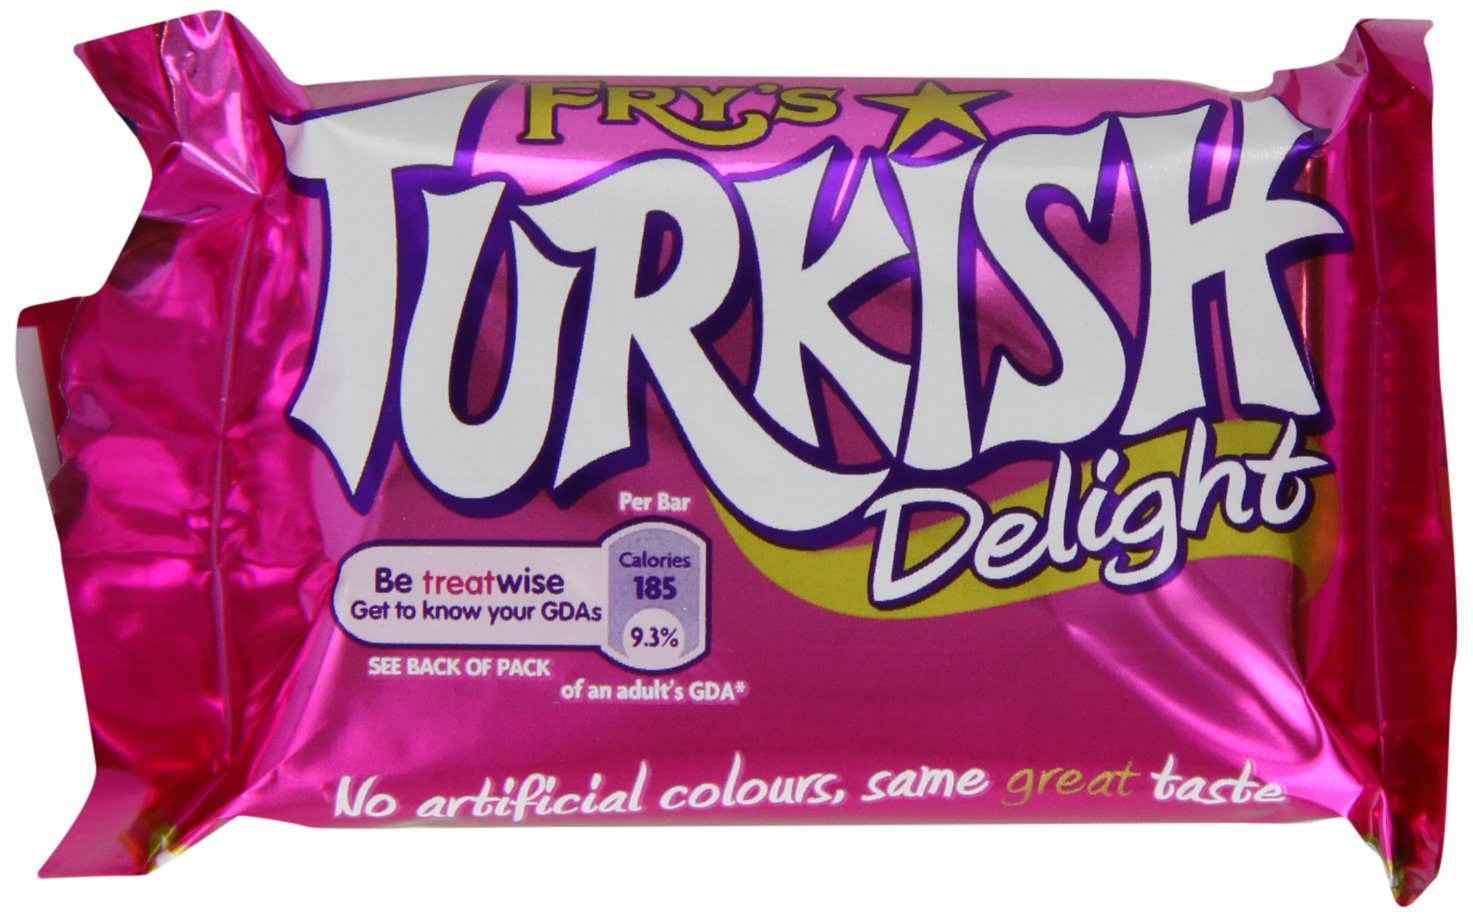 Fry's Turkish Delight Bars - 51g Pack of 48